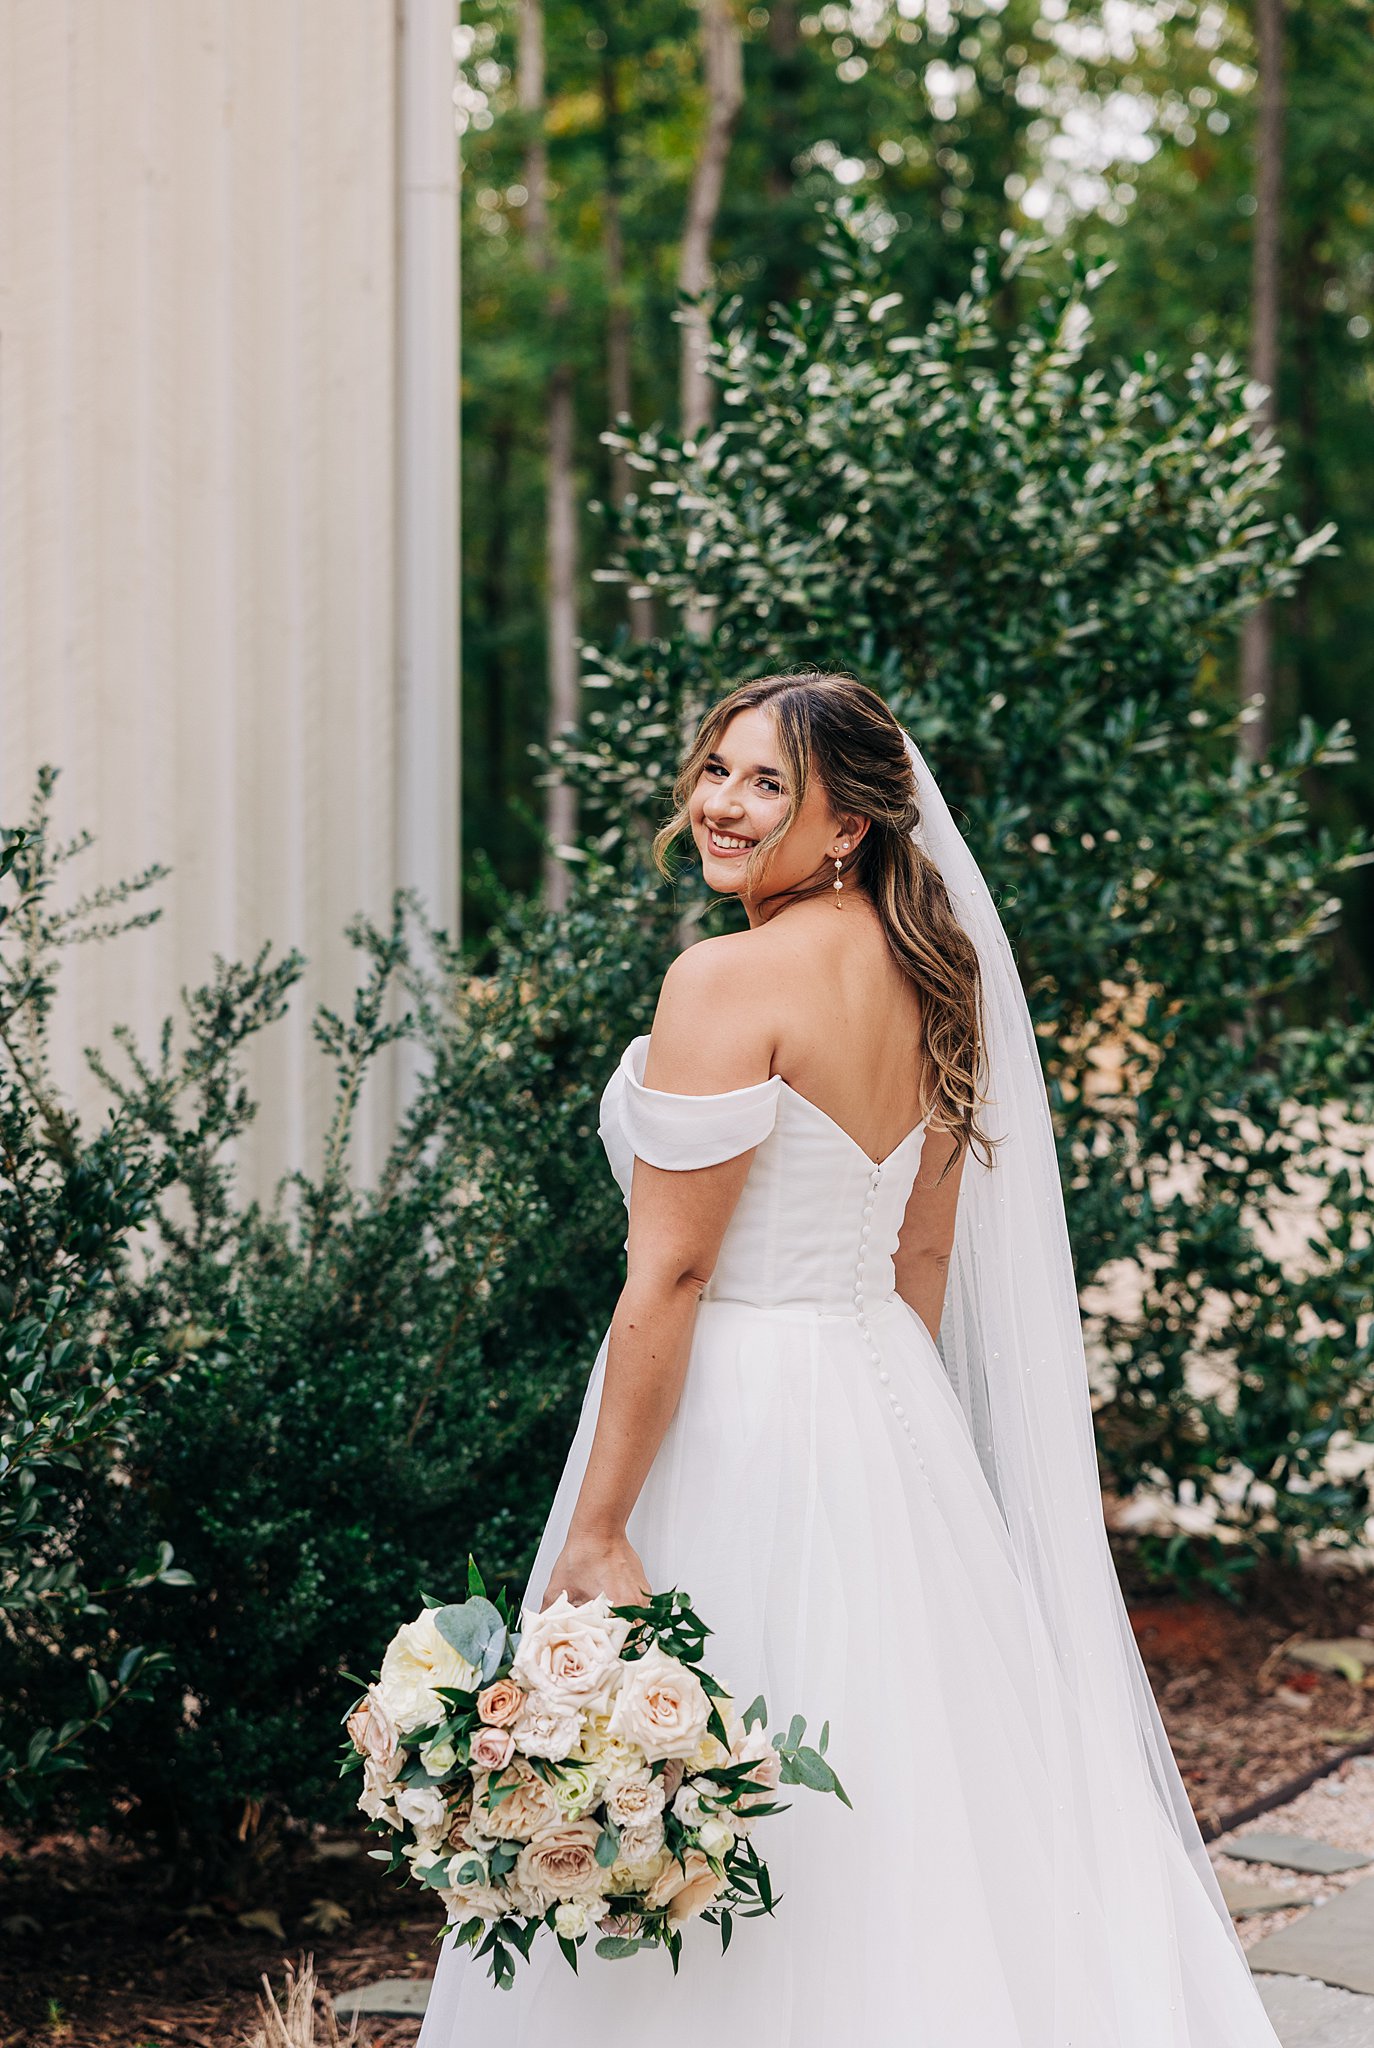 A bride in a silk dress smiles over her shoulder while standing in a garden